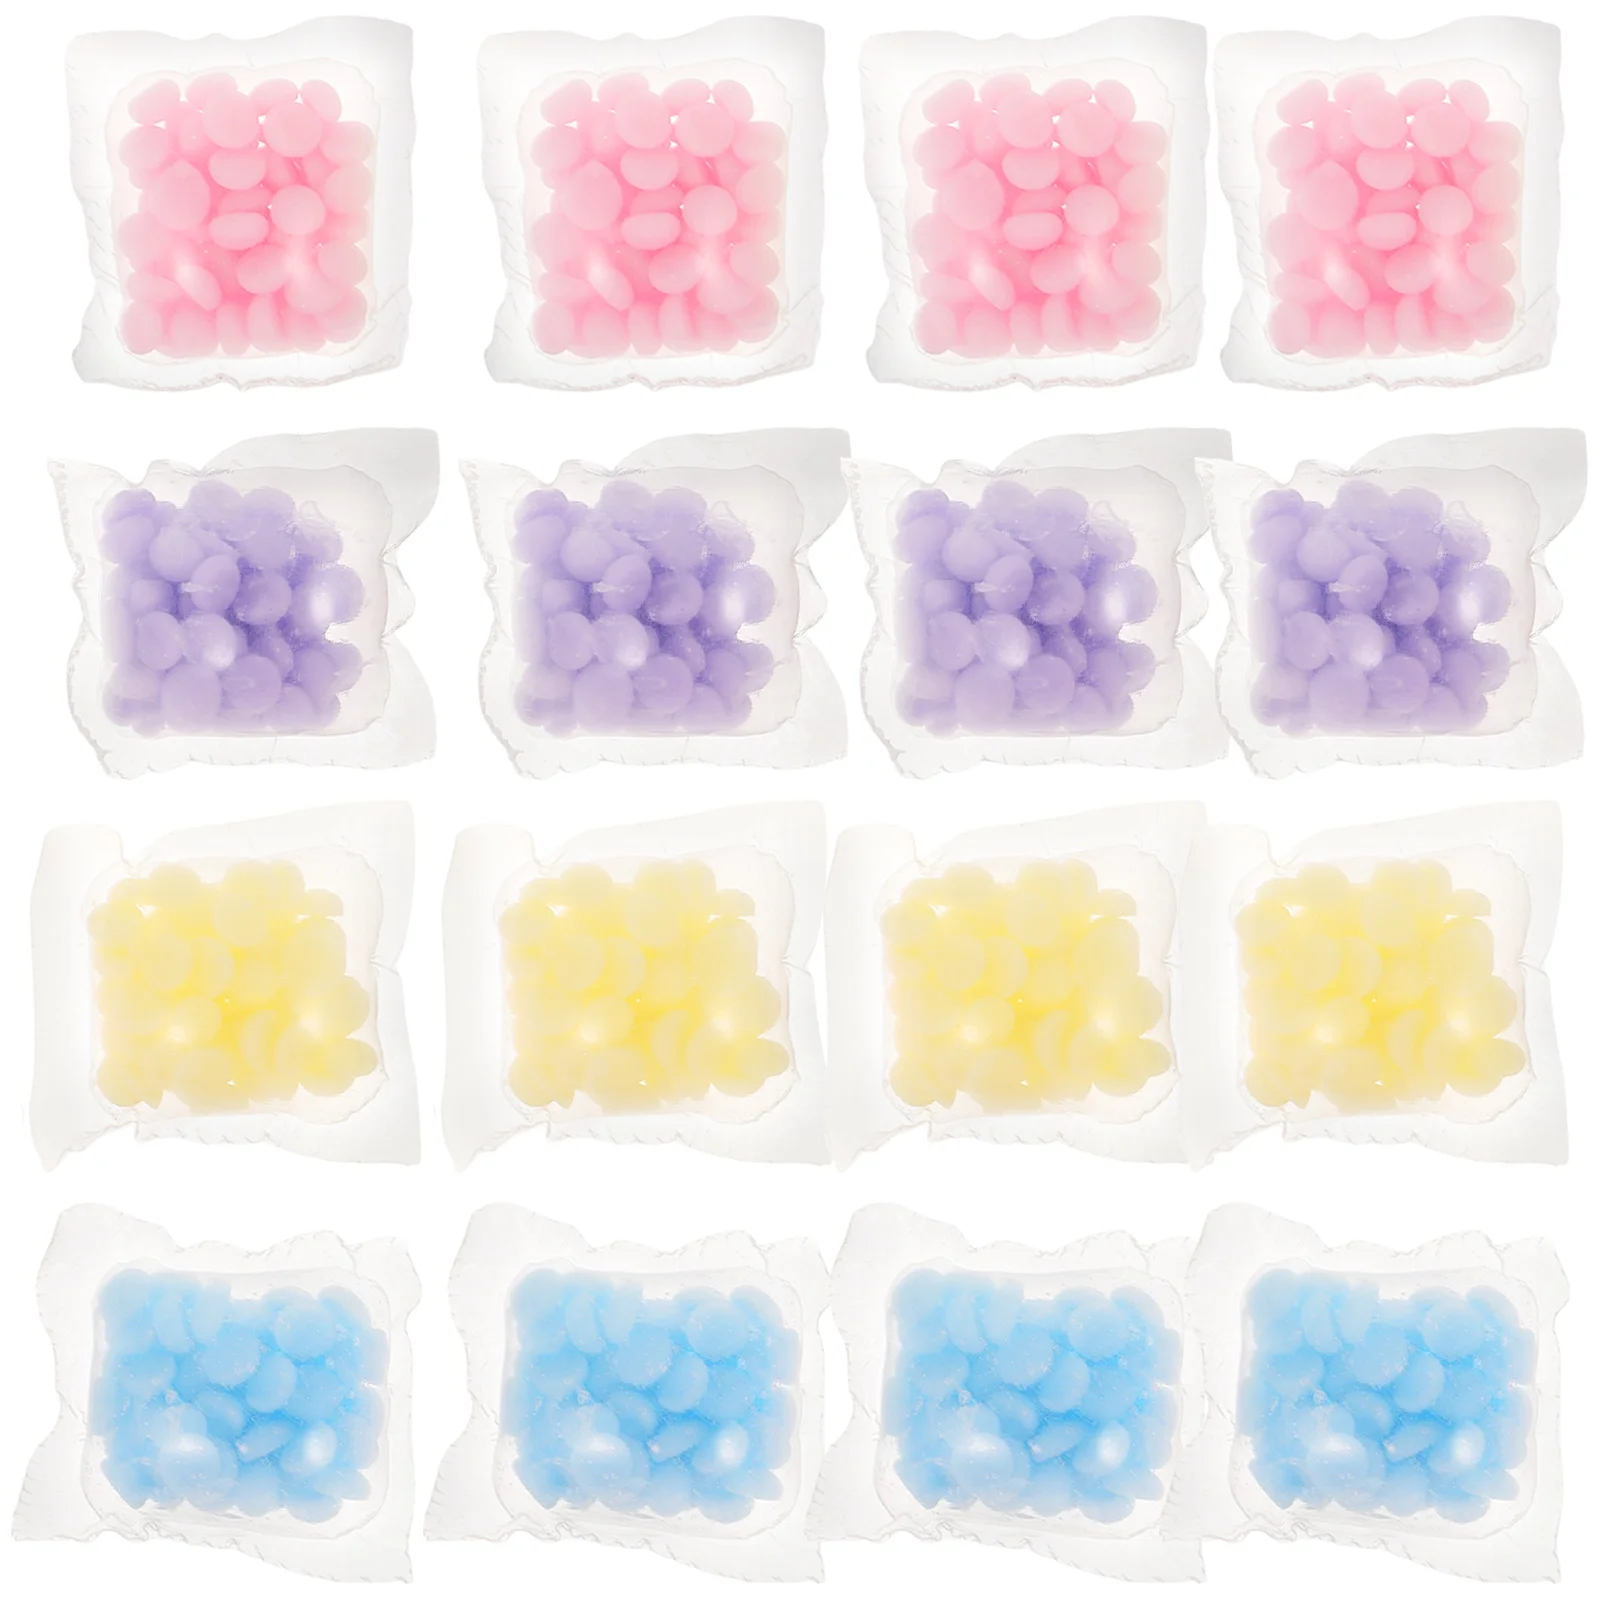 

Artibetter Laundry Scent Booster Beads - 50Pcs Mixed Color In-Wash Fragrance & Fabric Softener for Washer